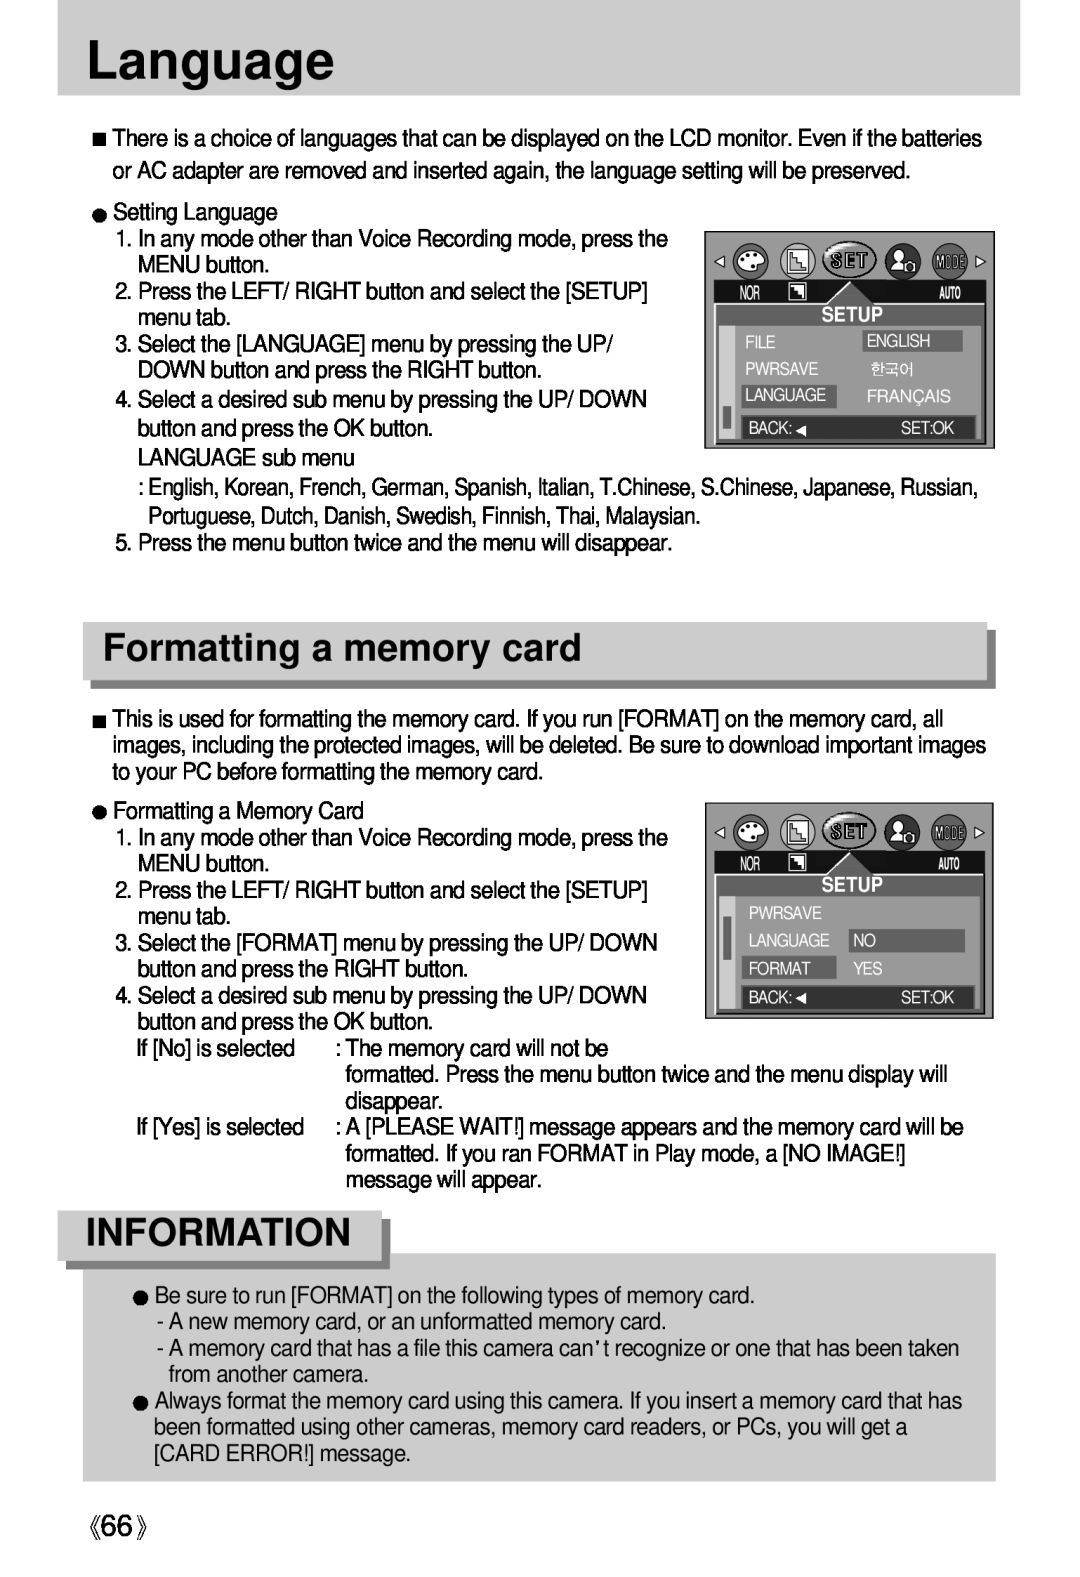 Samsung Digimax U-CA Language, Formatting a memory card, Information, Select a desired sub menu by pressing the UP/ DOWN 